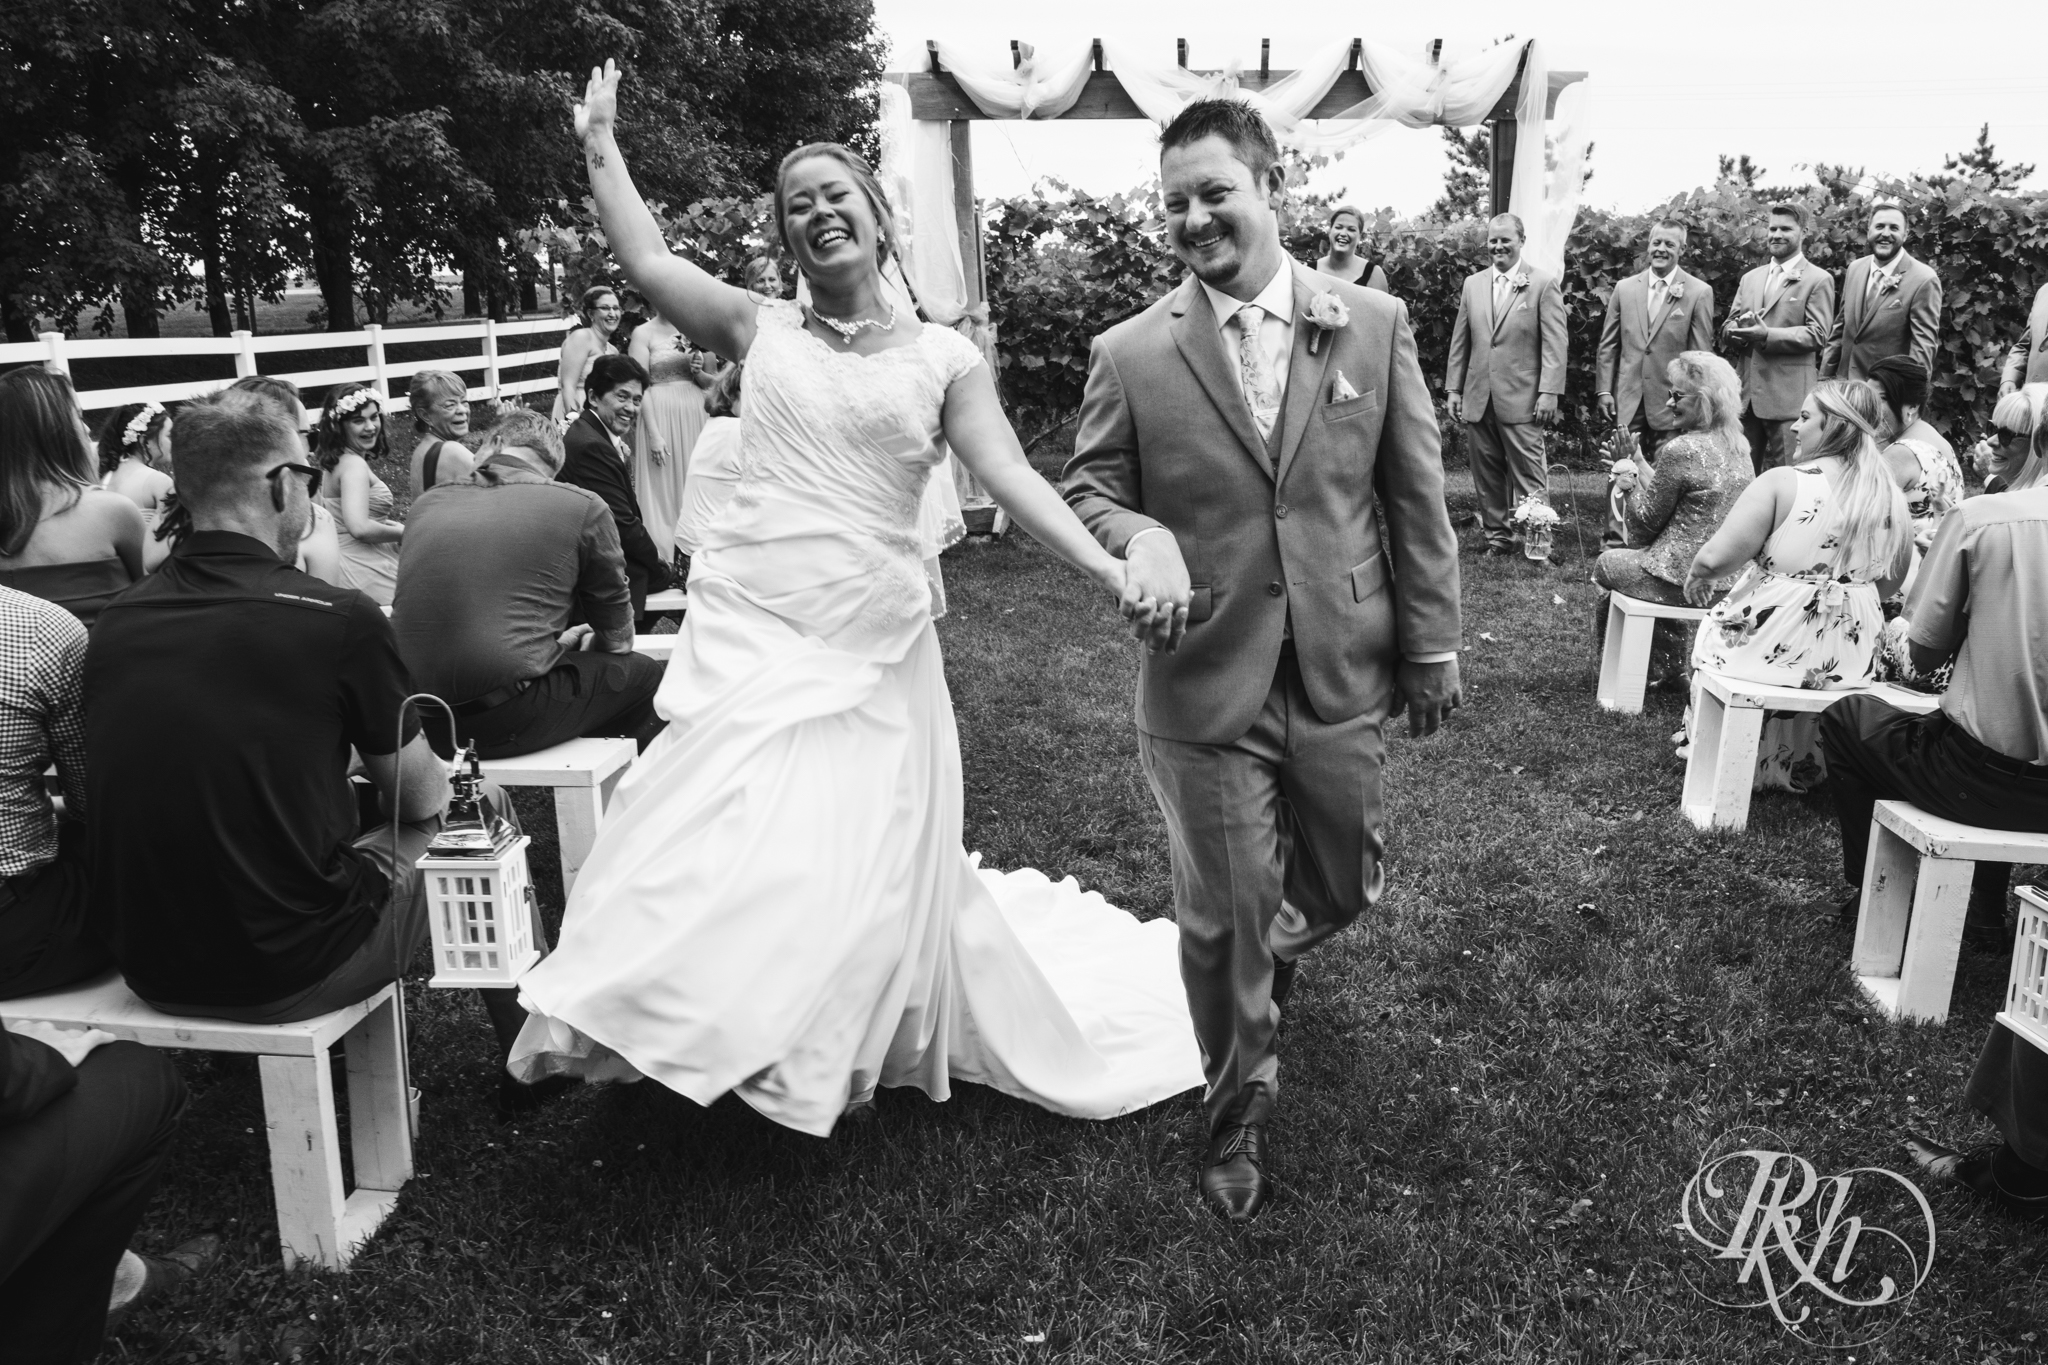 Bride and groom dancing down aisle after wedding ceremony at Next Chapter Winery in New Prague, Minnesota.